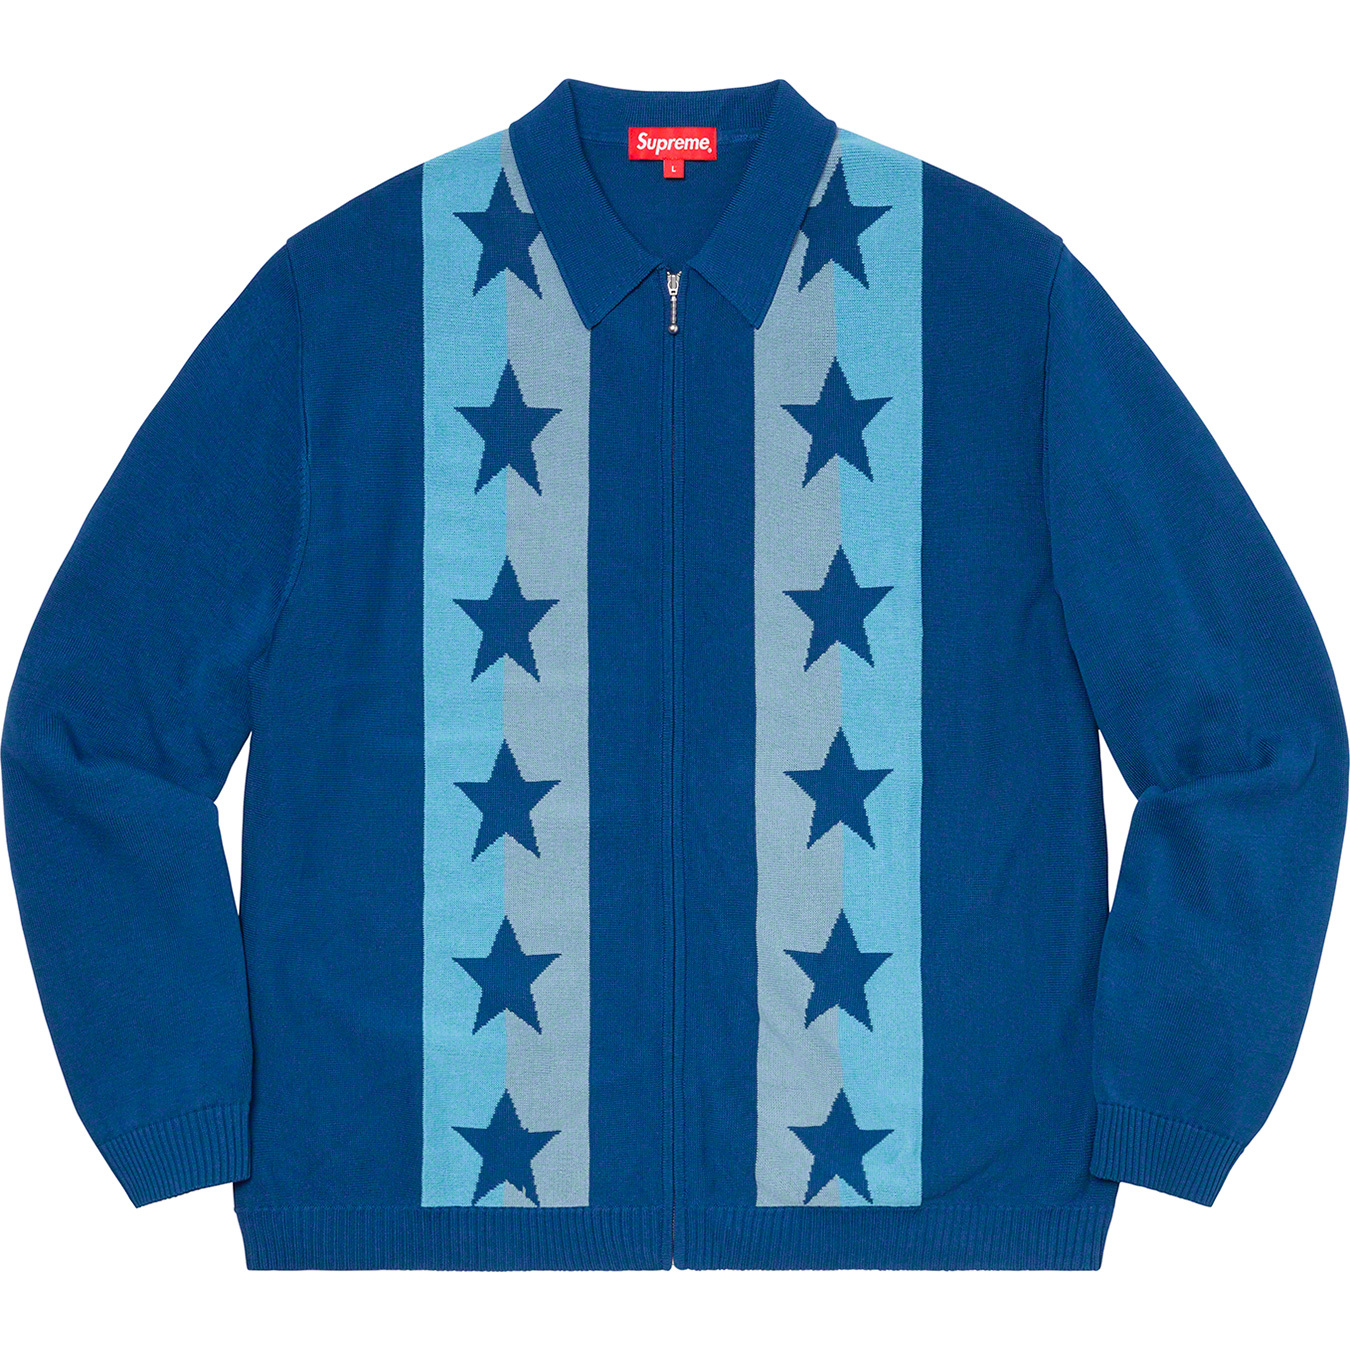 Stars Zip Up Sweater Polo   spring summer    Supreme